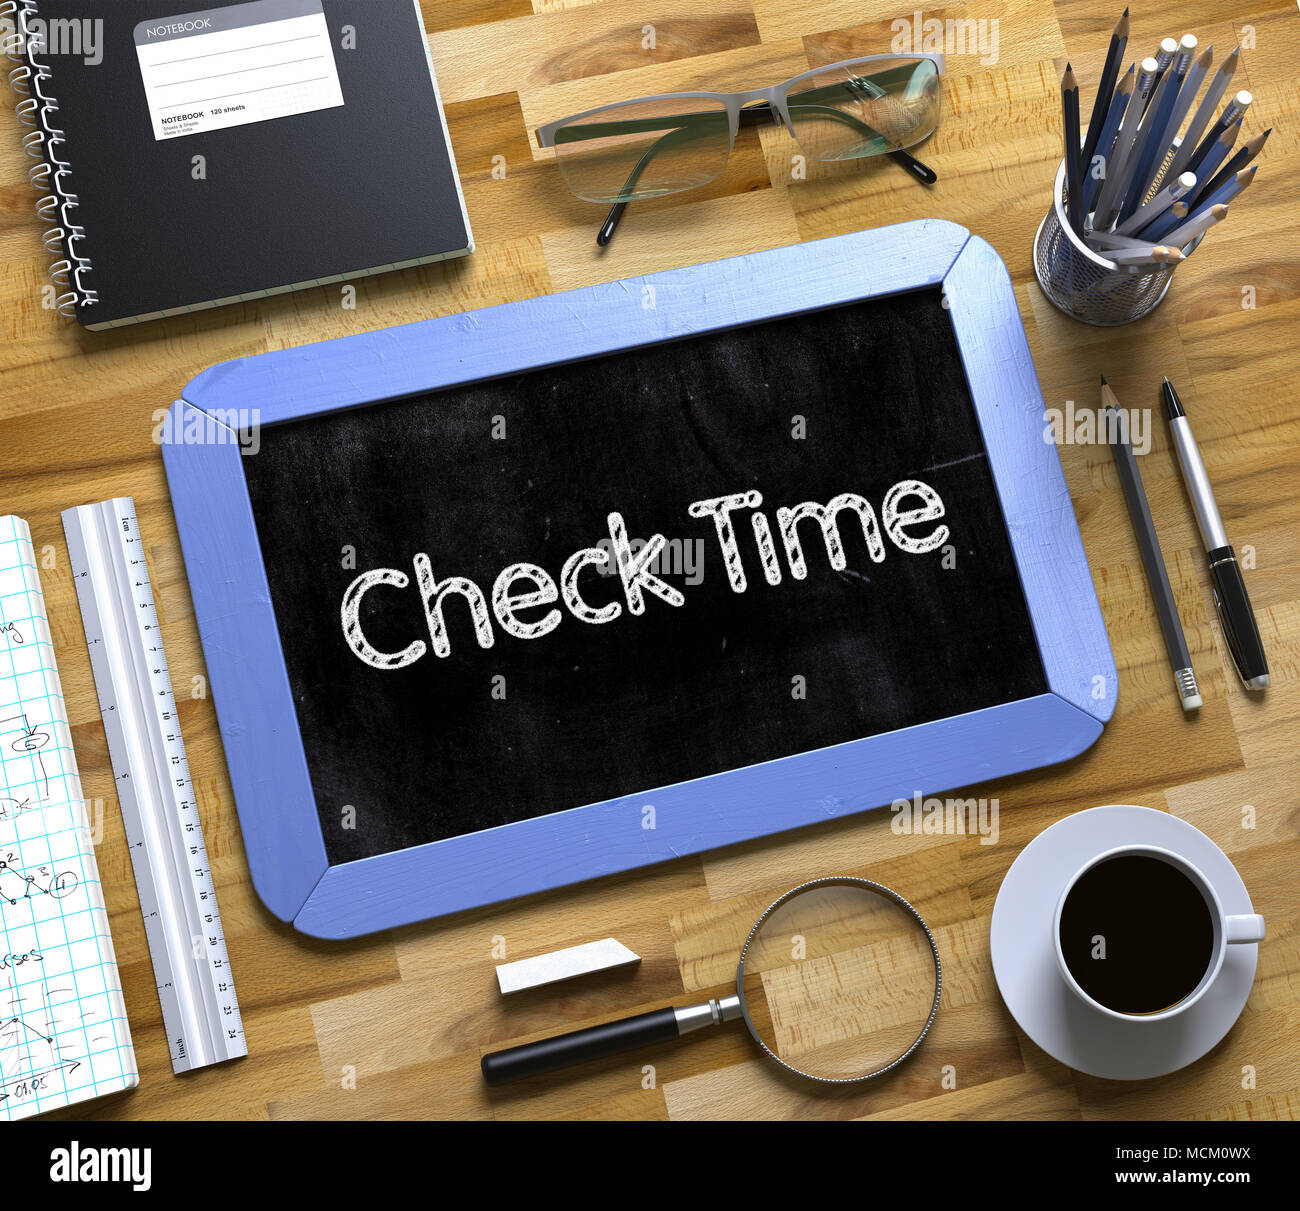 Check Time Handwritten on Small Chalkboard. 3d Stock Photo